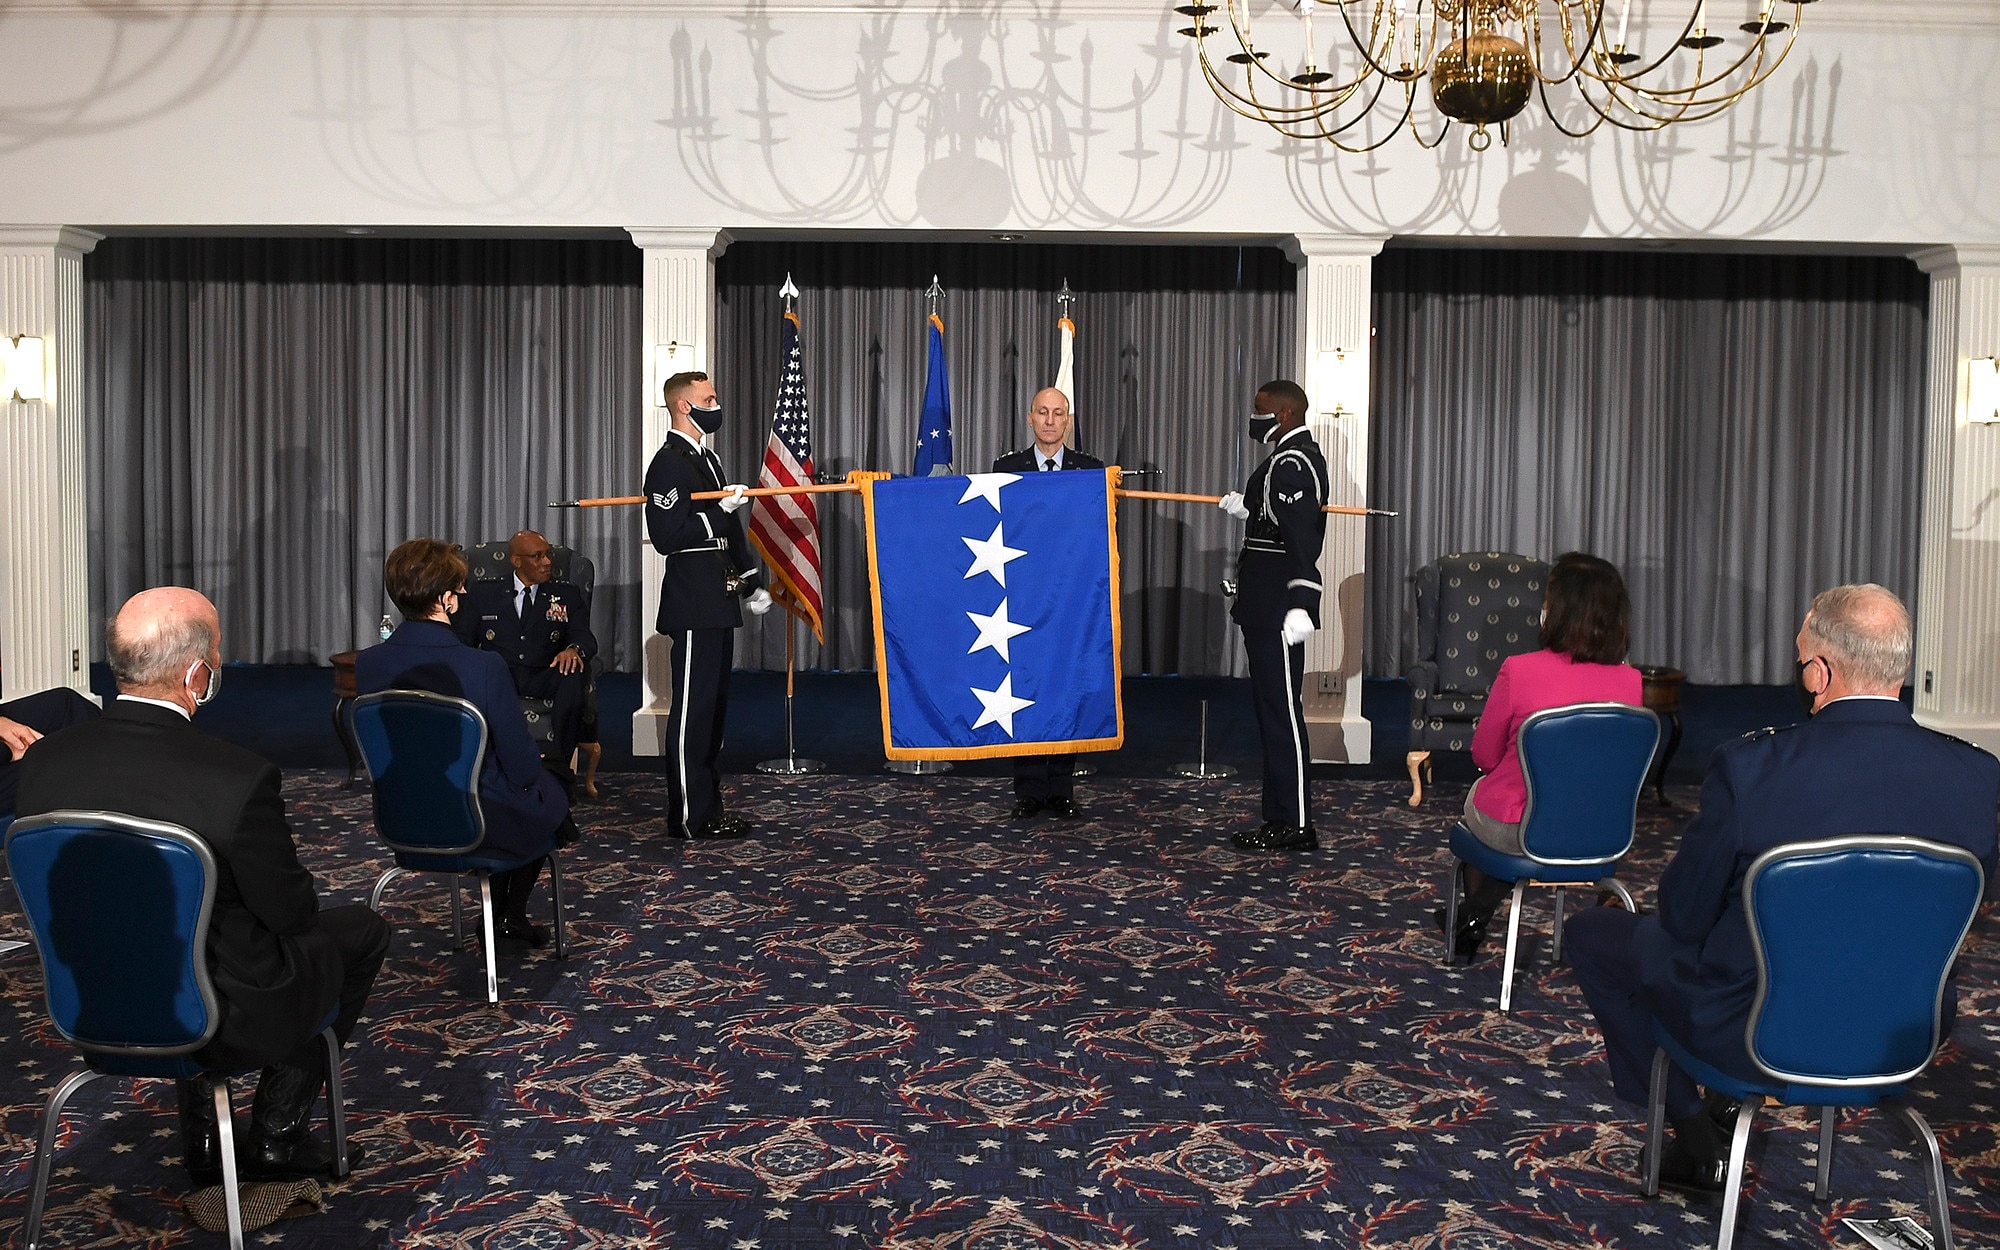 Members of the Air Force Honor Guard unfurl Gen. David Allvin's four-star flag during his promotion ceremony at Joint Base Anacostia-Bolling, Washington, D.C., Nov. 12, 2020. Allvin will serve as the 40th Vice Chief of Staff of the Air Force. (U.S. Air Force Photo by Andy Morataya)